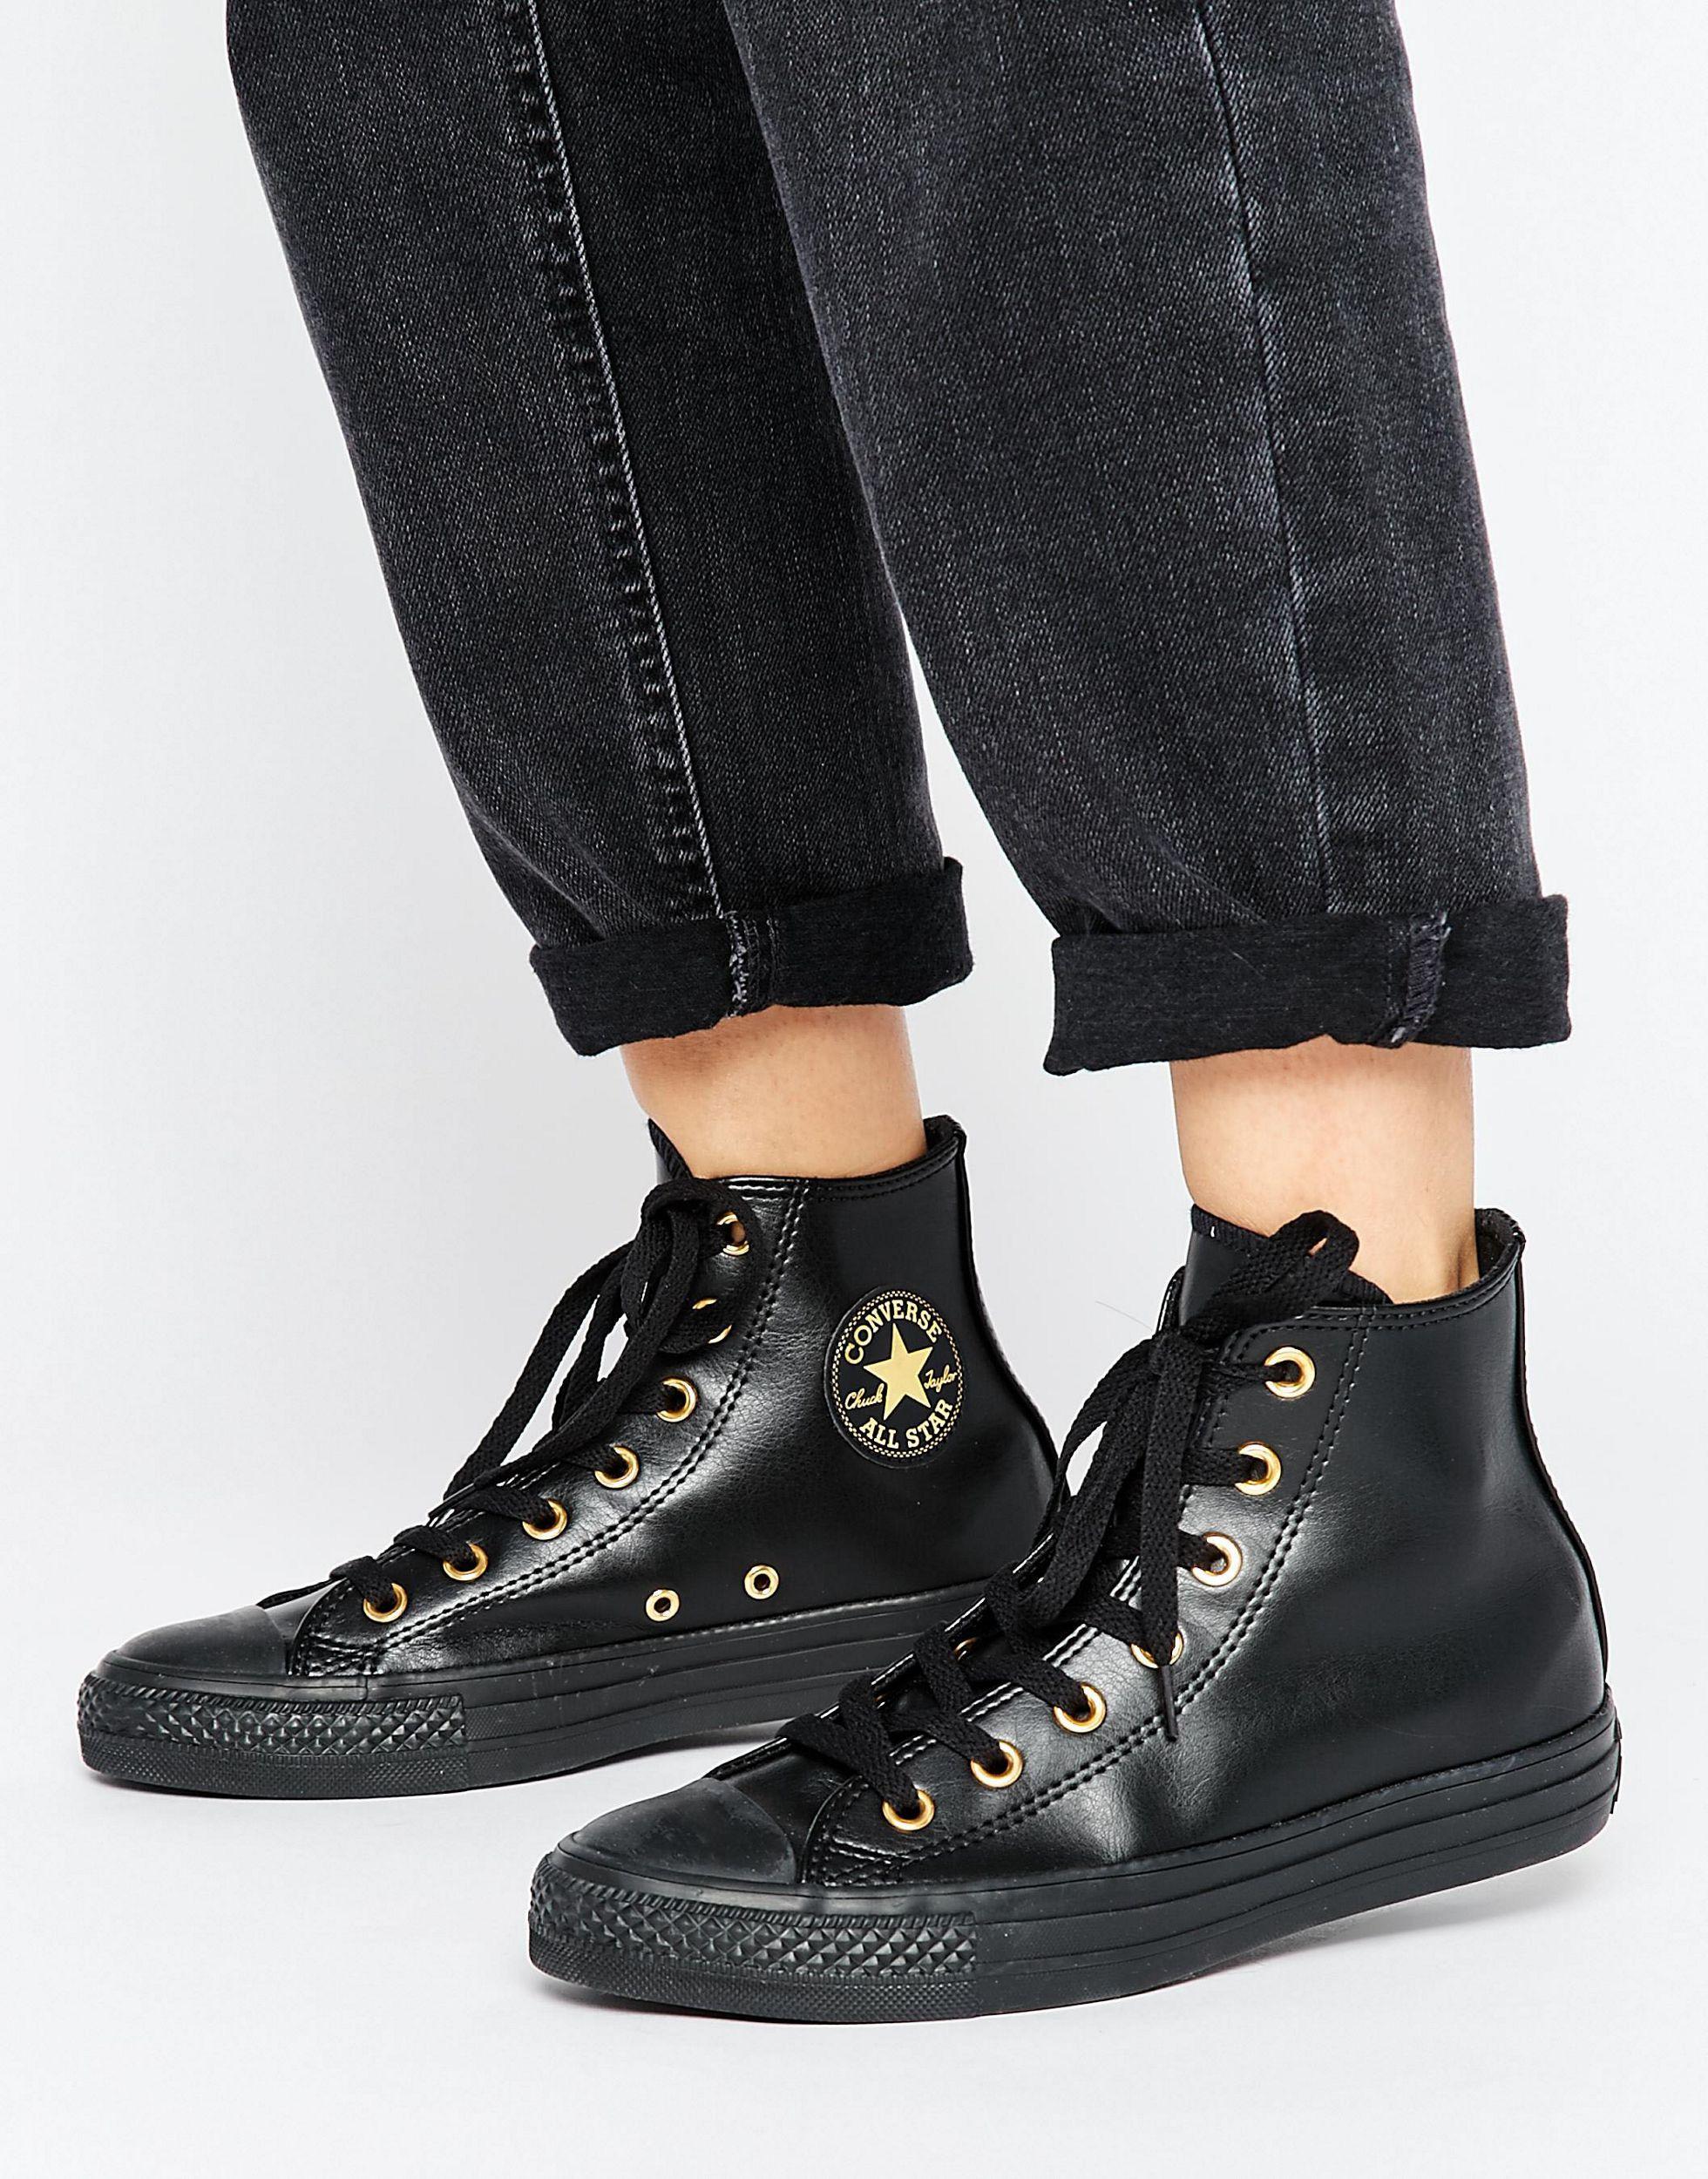 Gendanne Handel Transportere Converse Chuck Taylor Hi Top Sneakers In Black With Gold Eyelets | Lyst